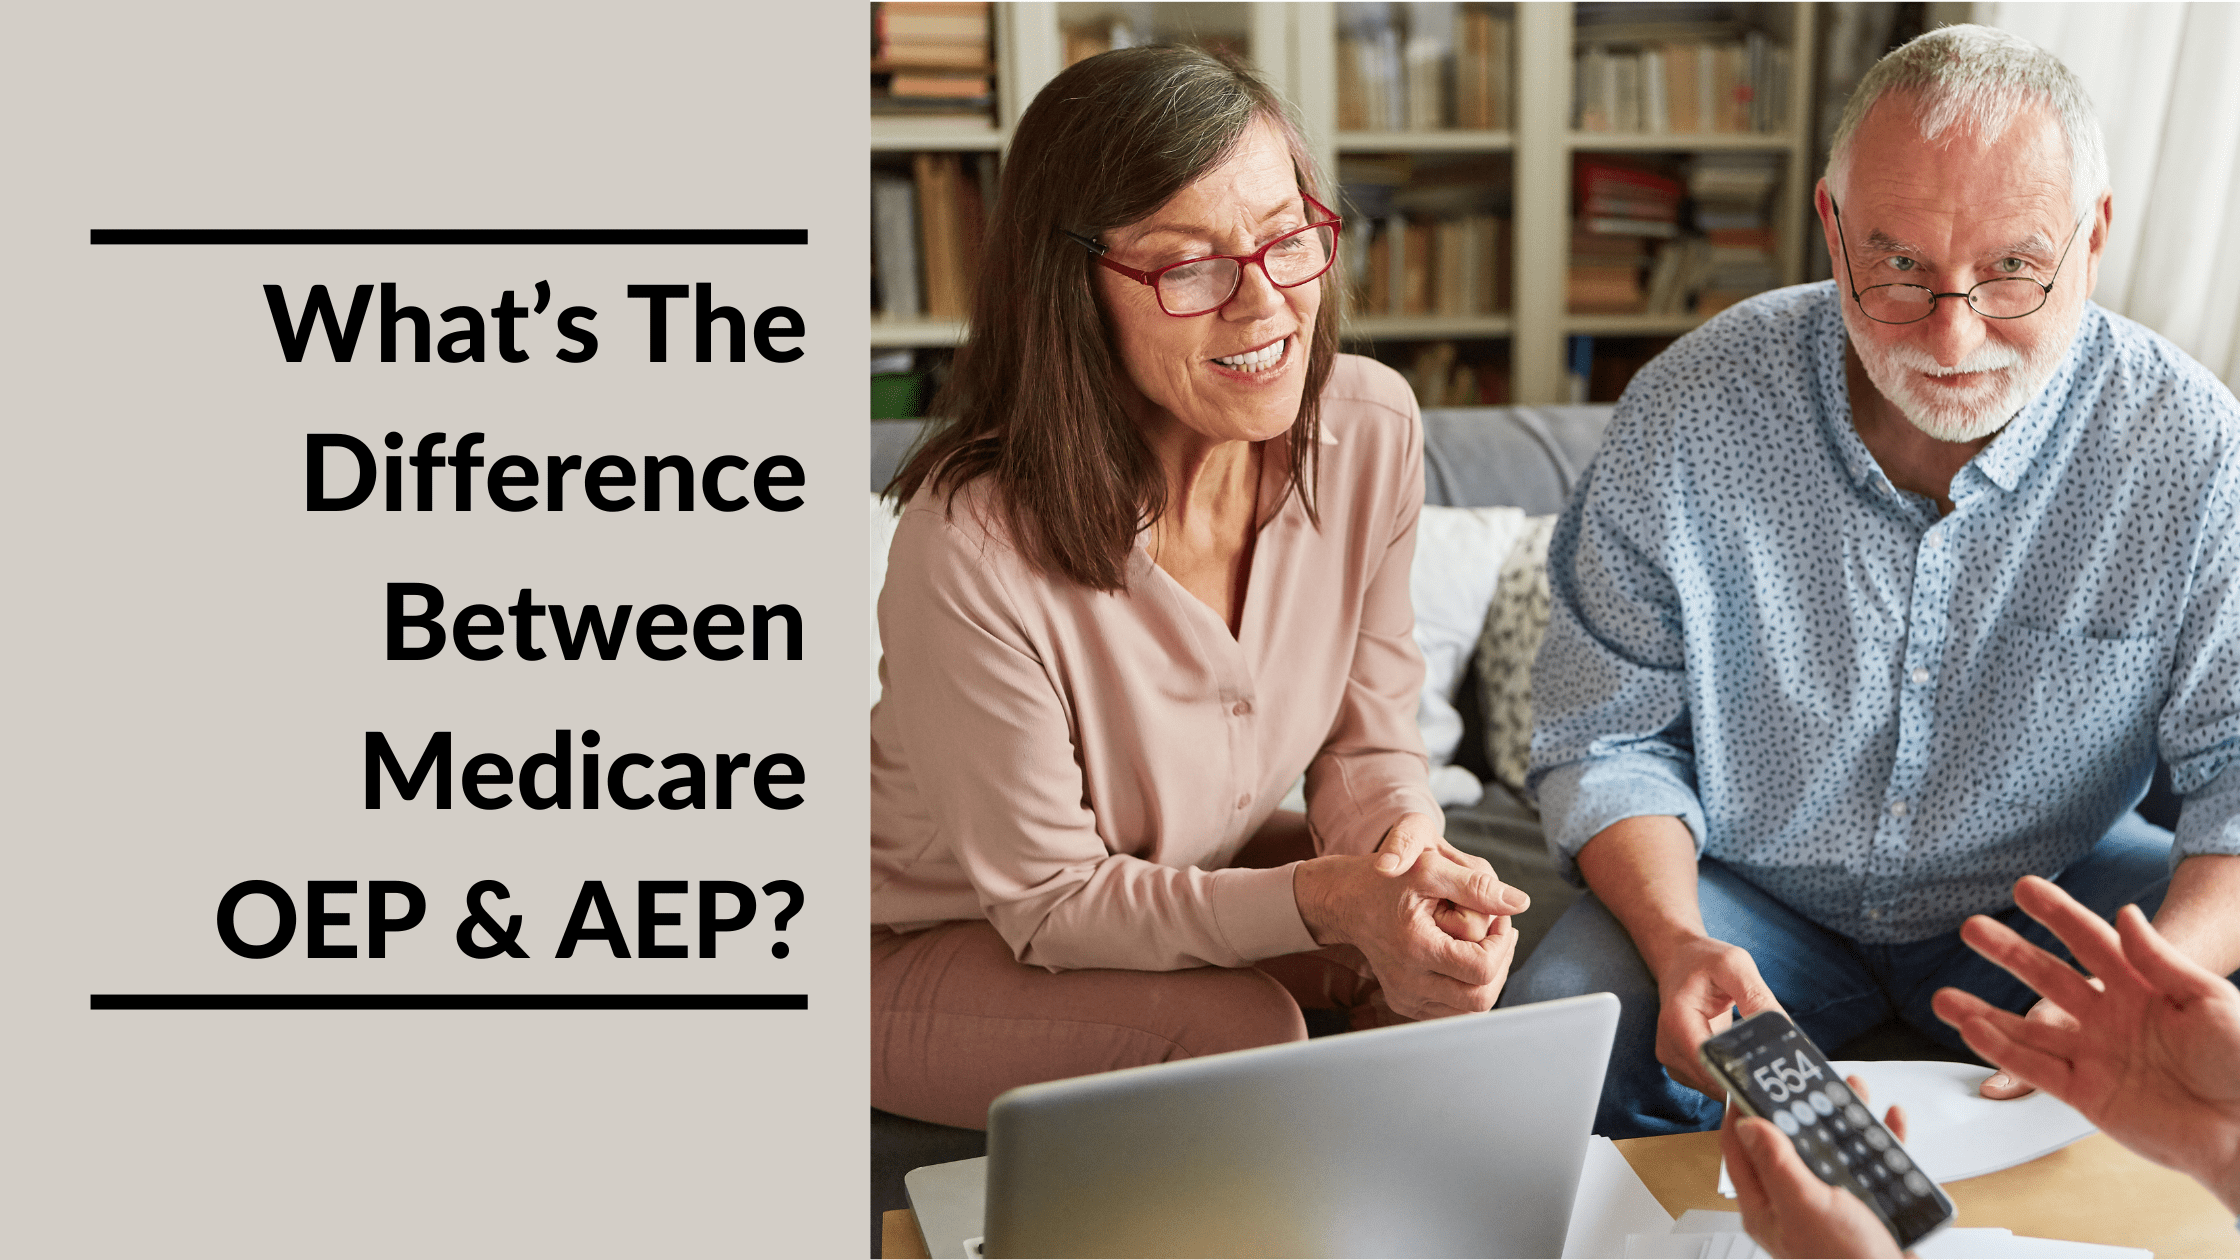 What’s The Difference Between Medicare Advantage OEP & AEP Featured Image